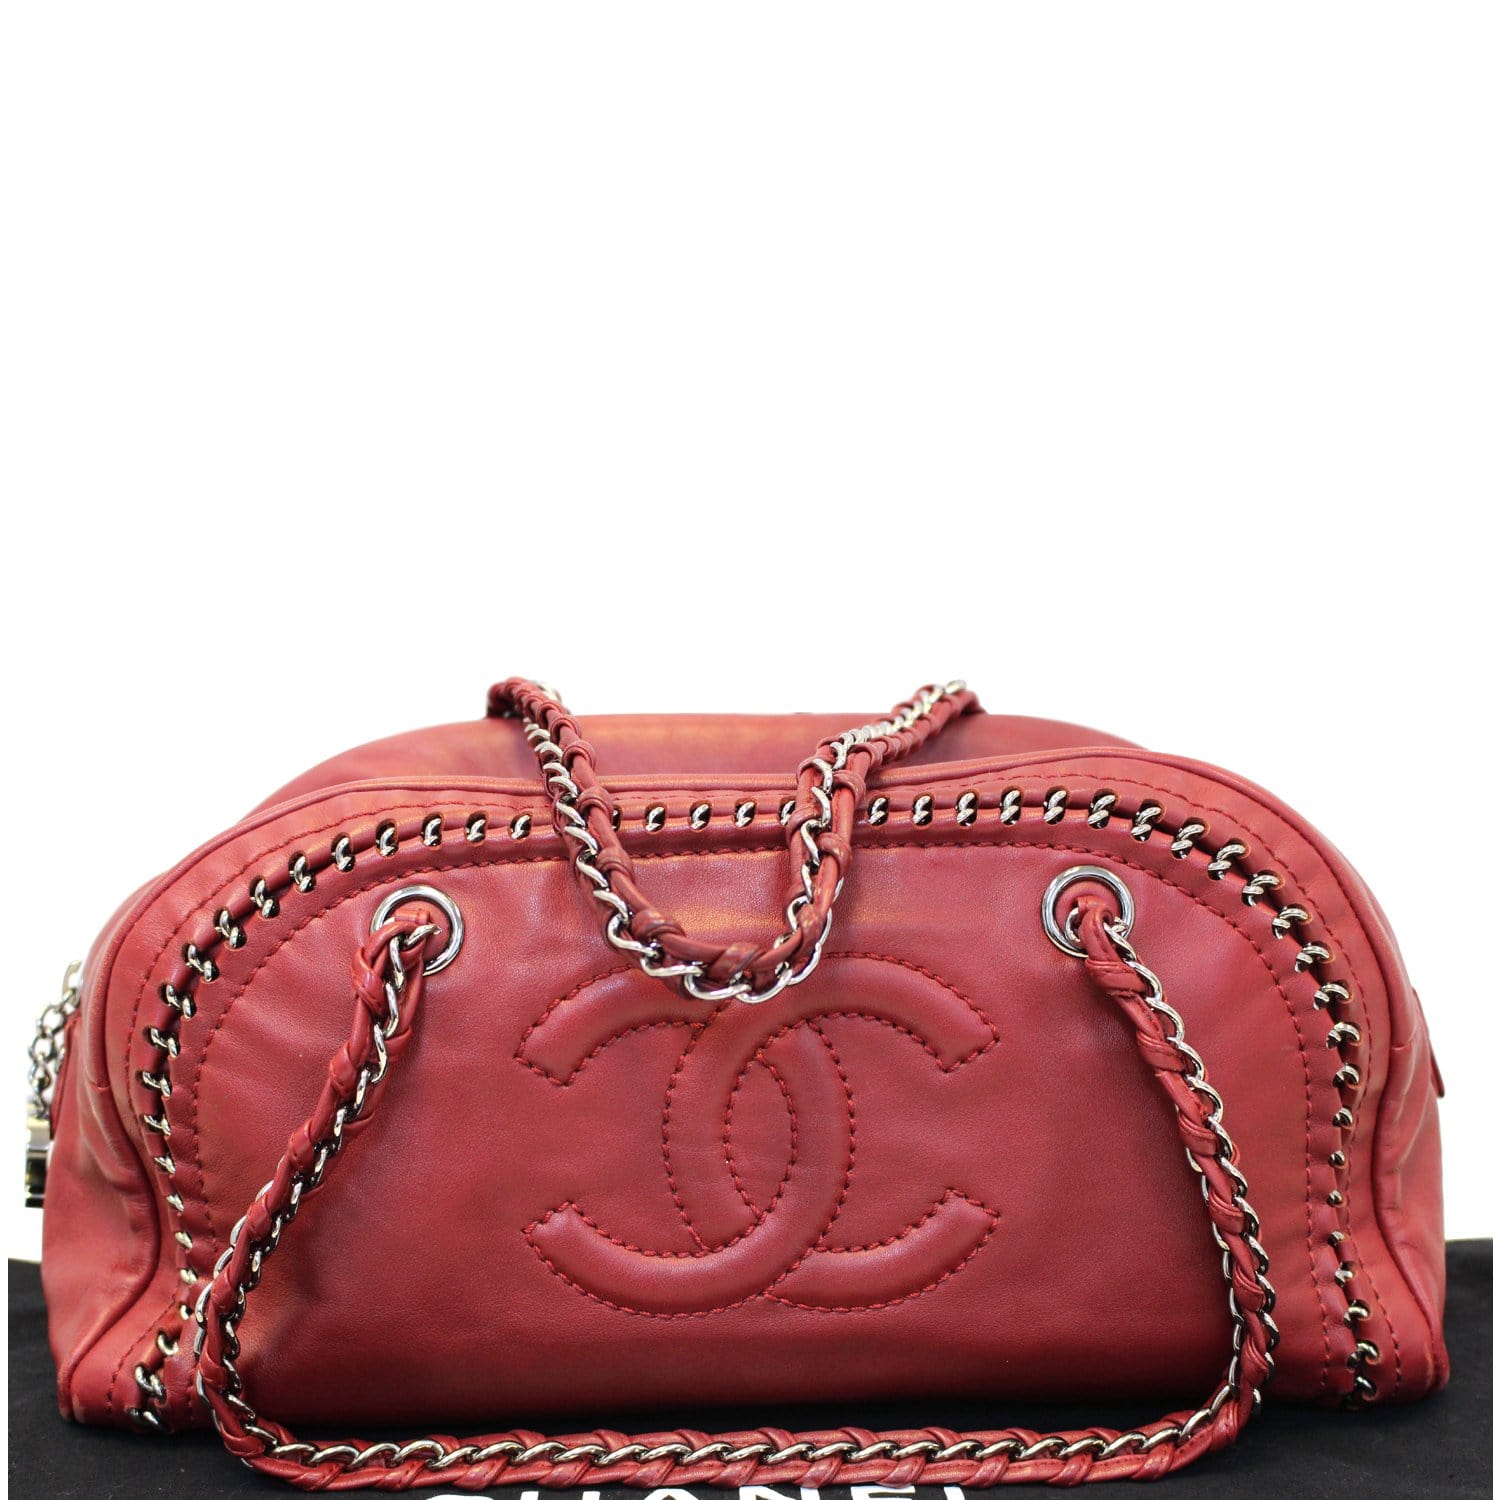 CHANEL Calfskin Chain 20s Signature Bowling Bag Red | FASHIONPHILE